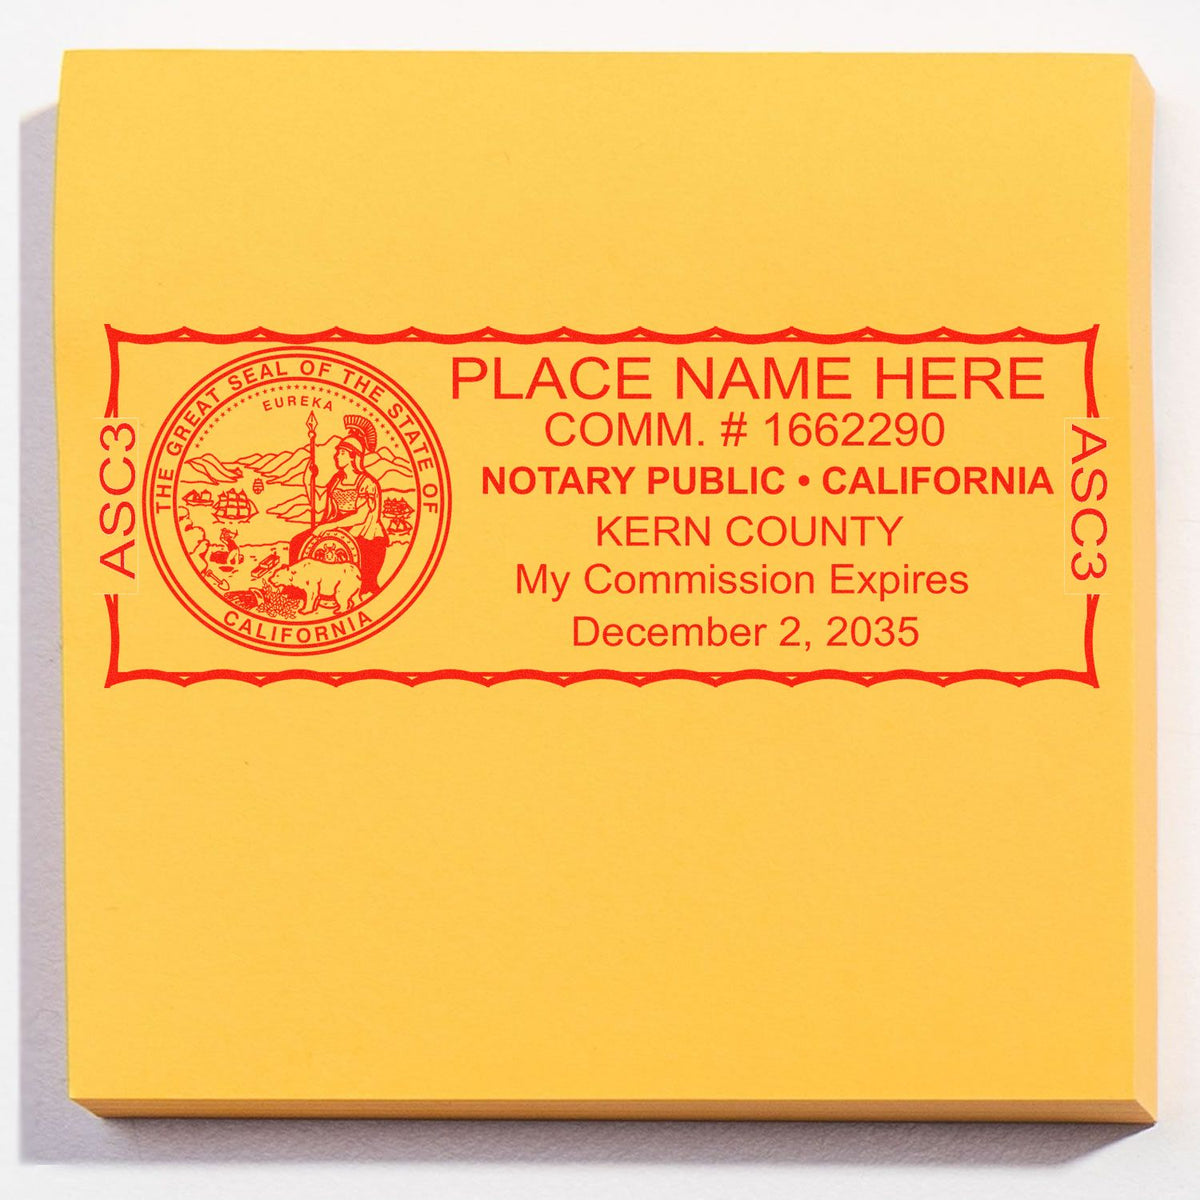 An alternative view of the Slim Pre-Inked State Seal Notary Stamp for California stamped on a sheet of paper showing the image in use